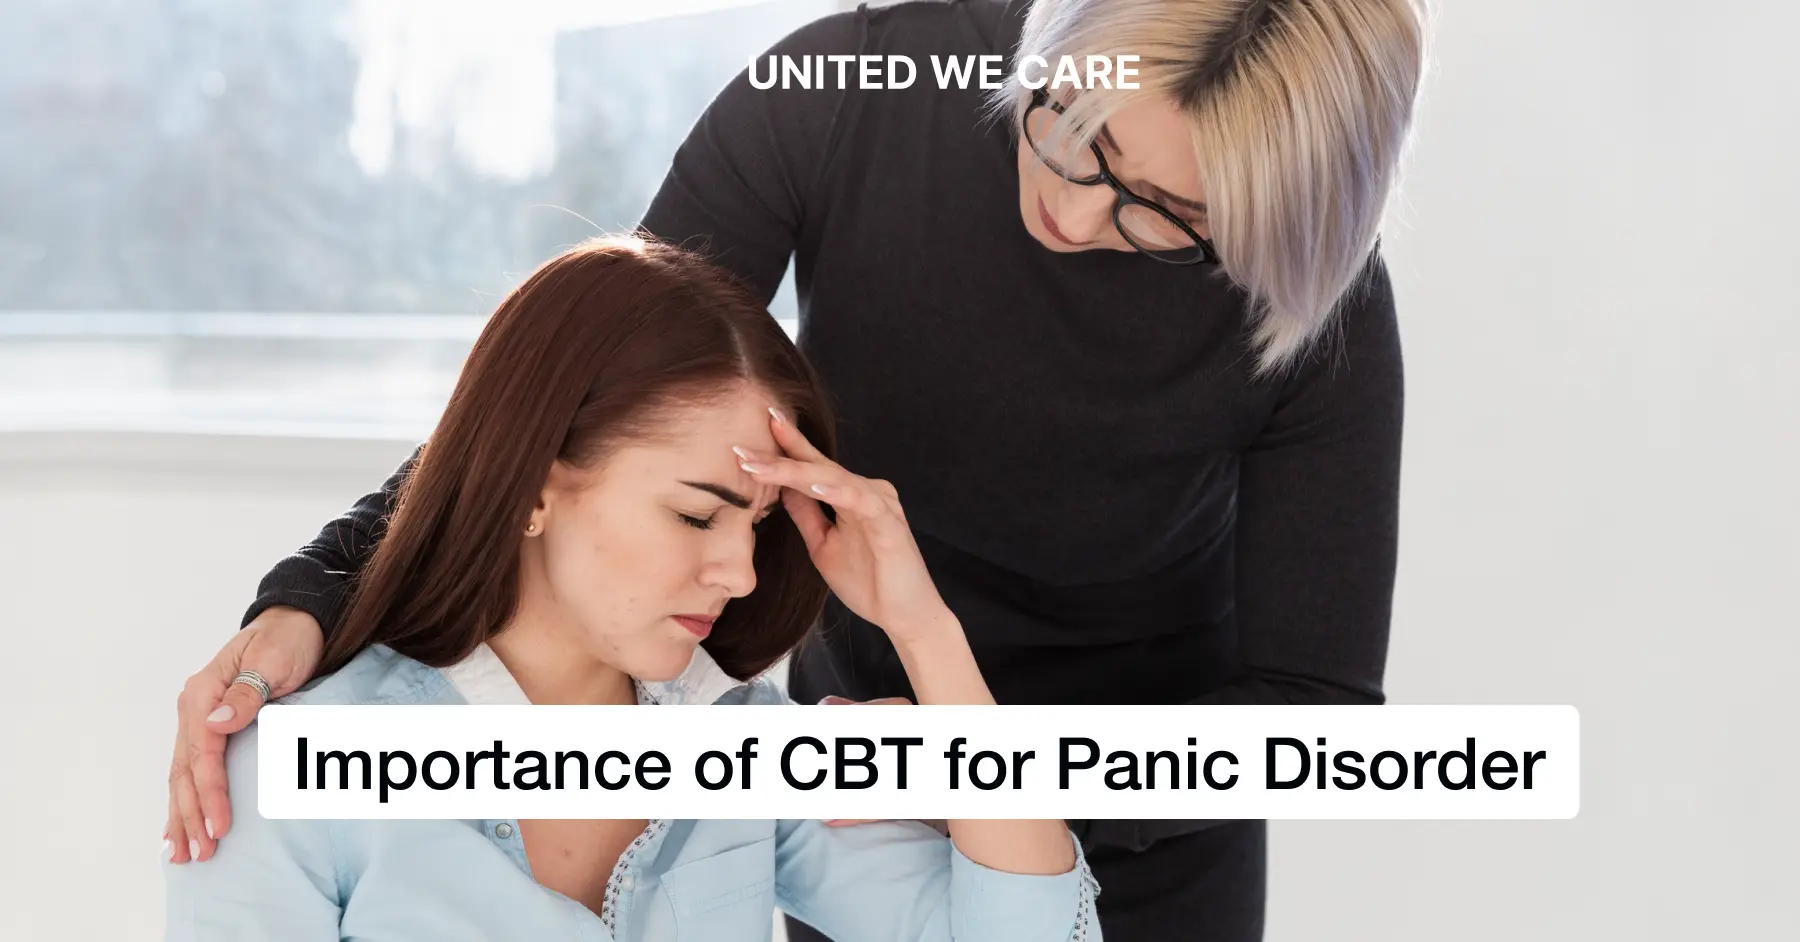 CBT for Panic Disorder: The Secret CBT Strategy to Overcome Panic Attacks